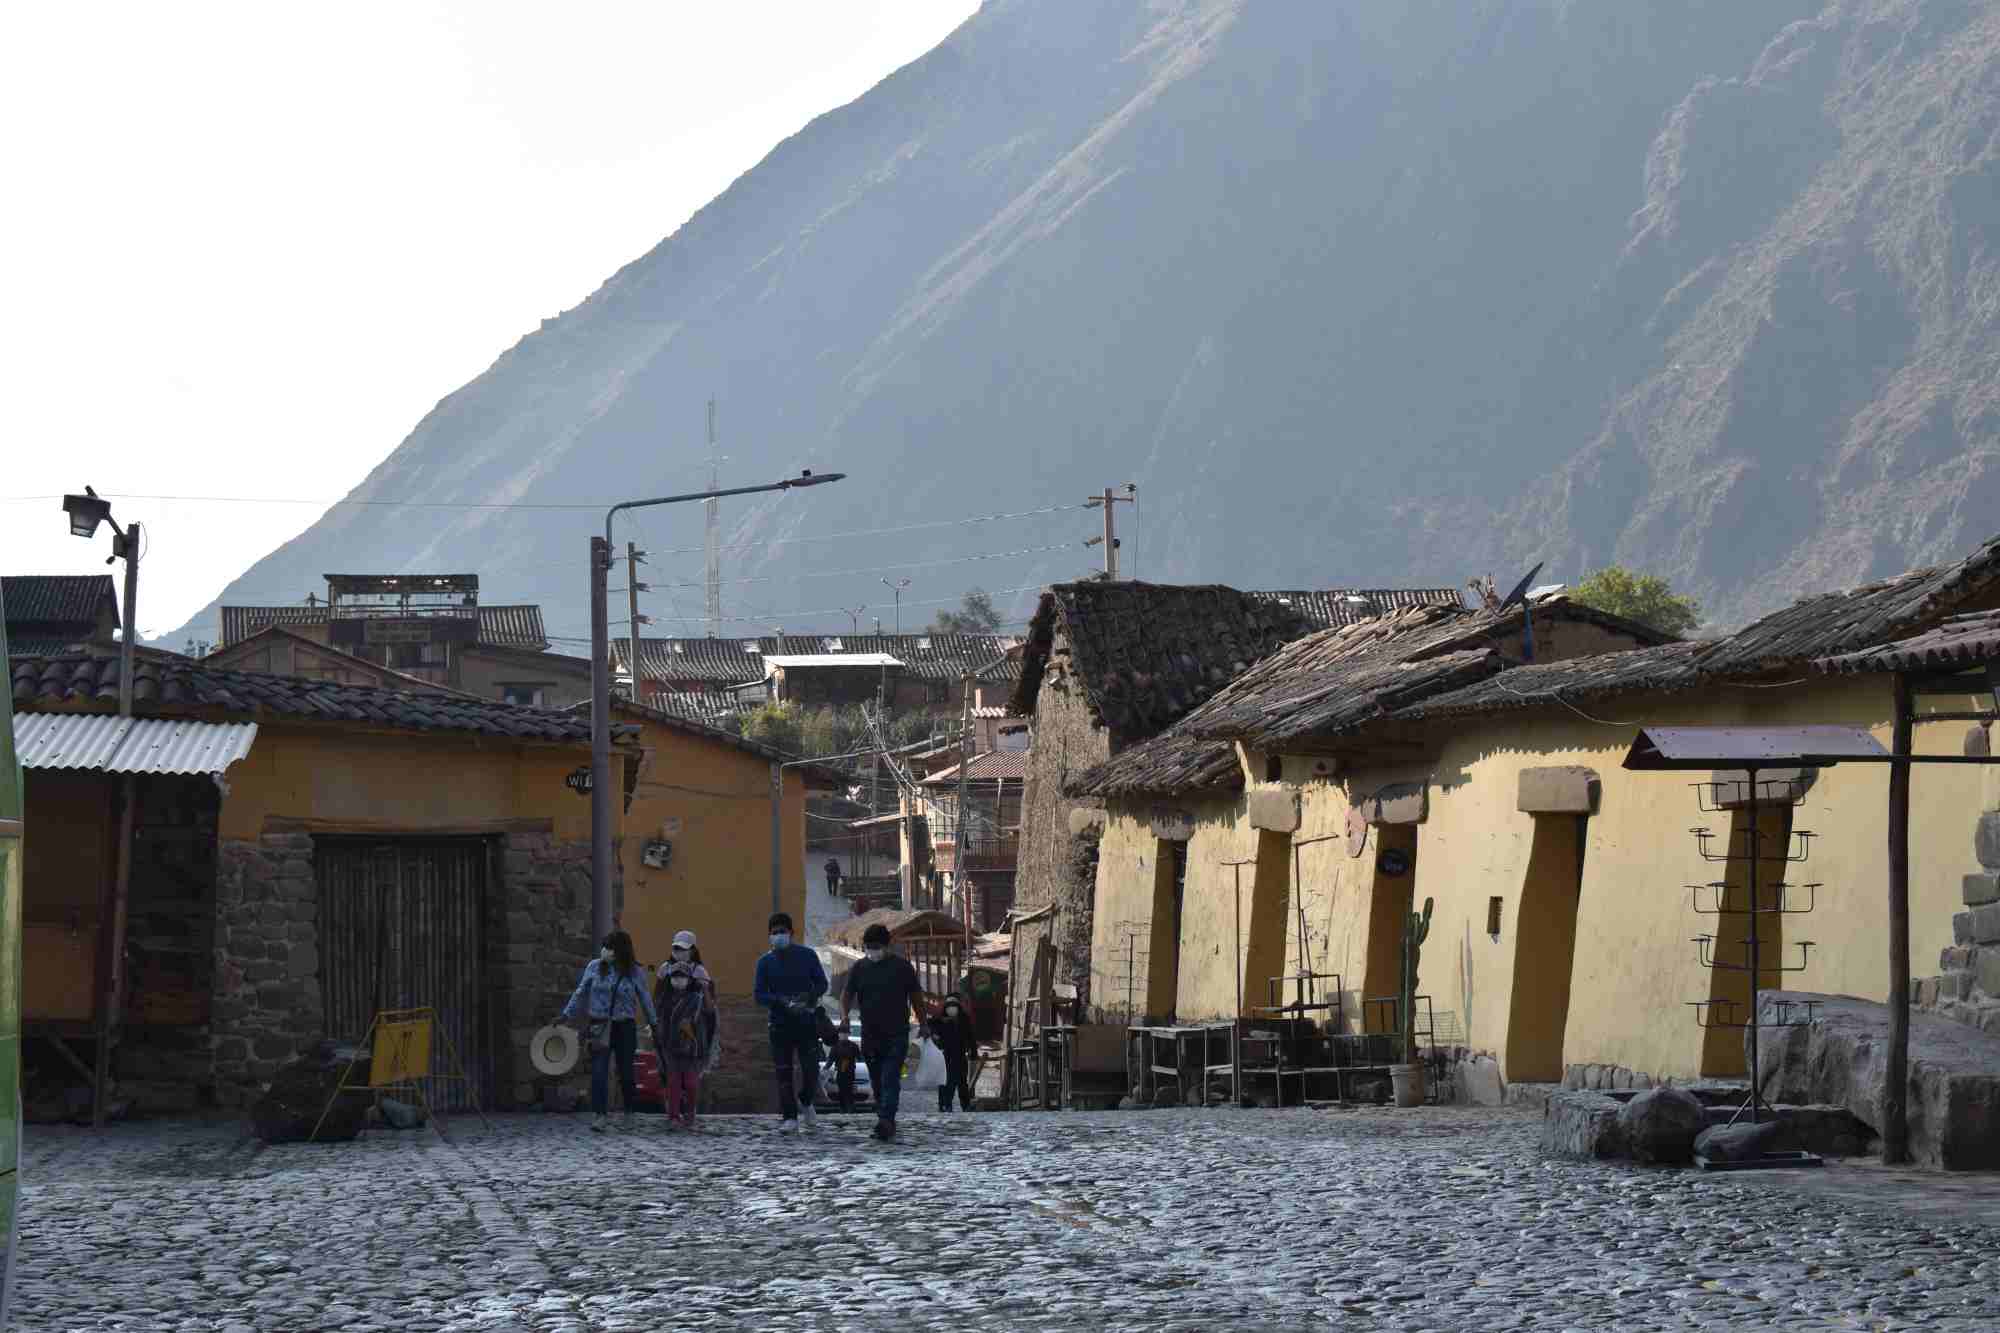 How many days to spend in Cusco and Machu Picchu